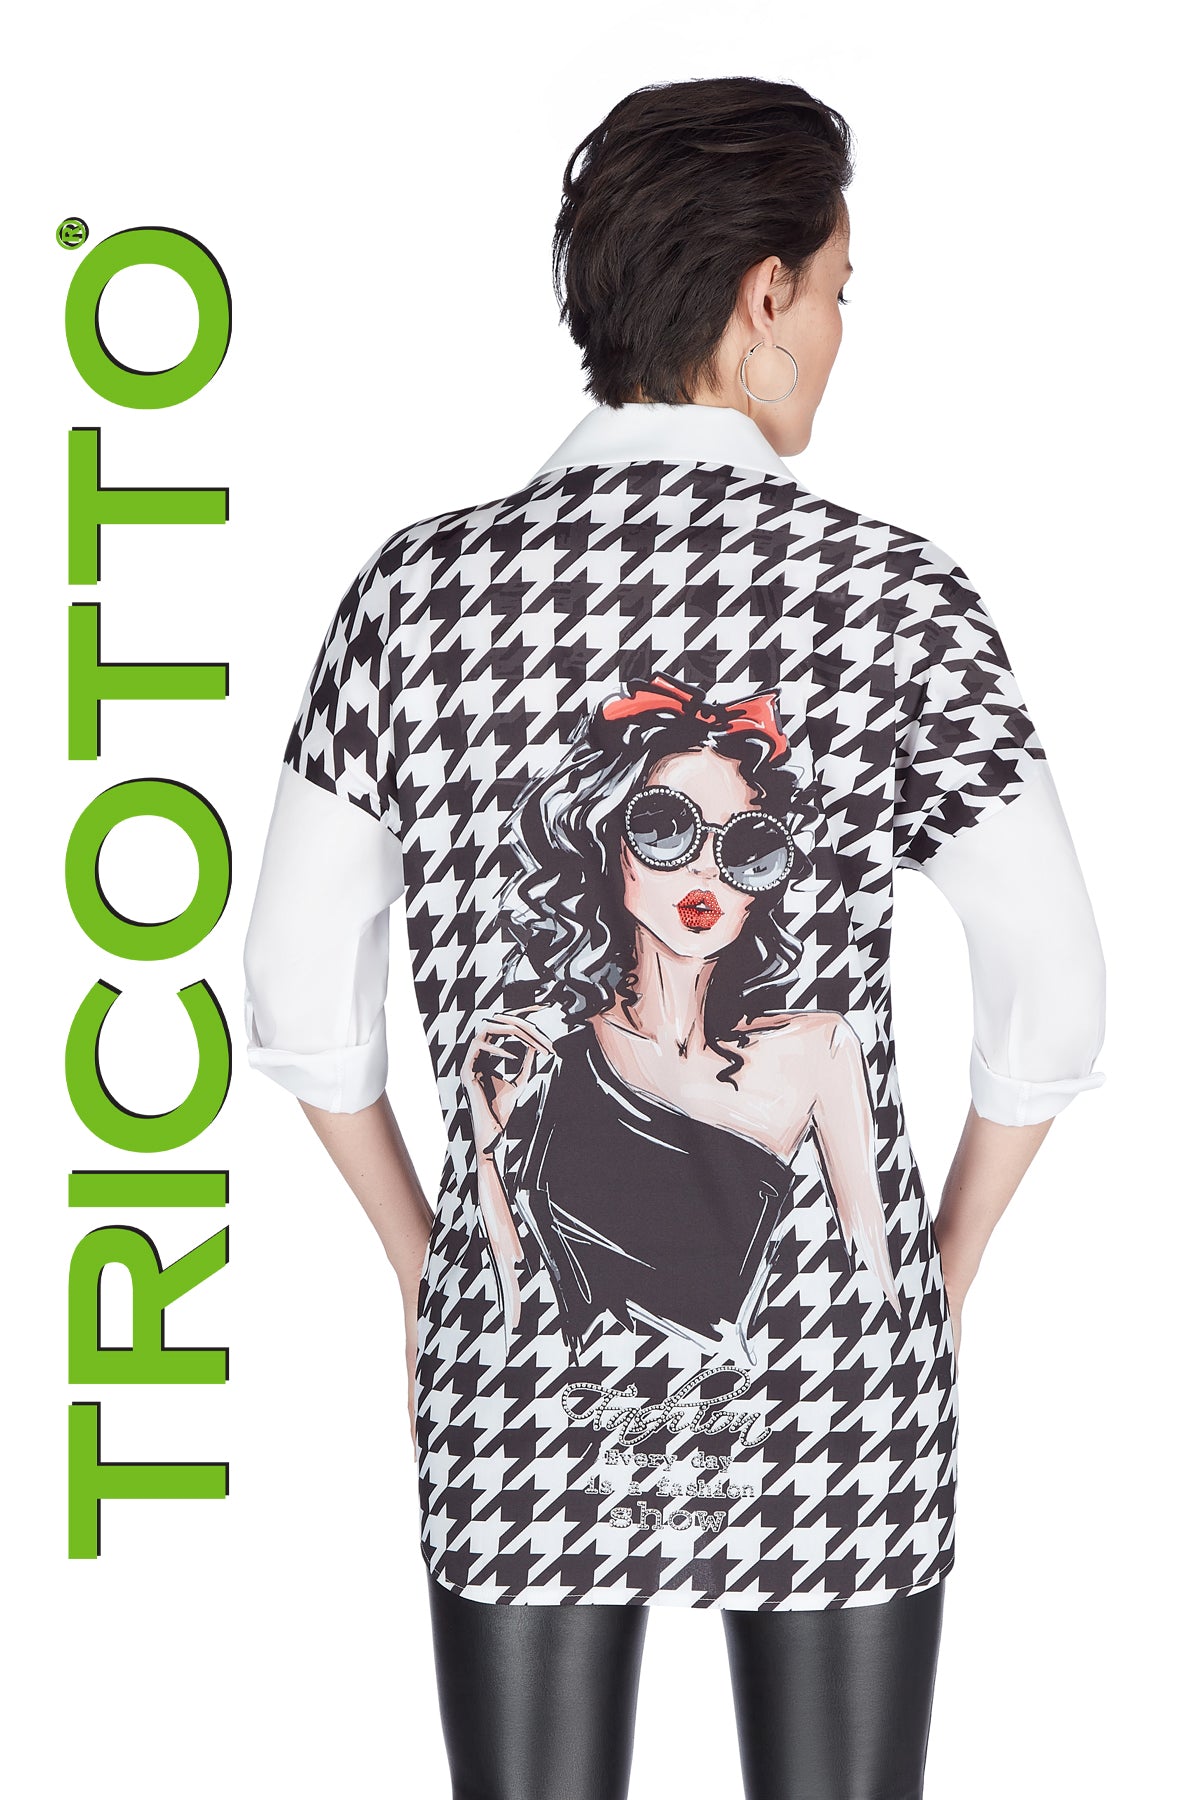 Tricotto Dresses-Buy Tricotto Clothing Online-Tricotto Spring 2022